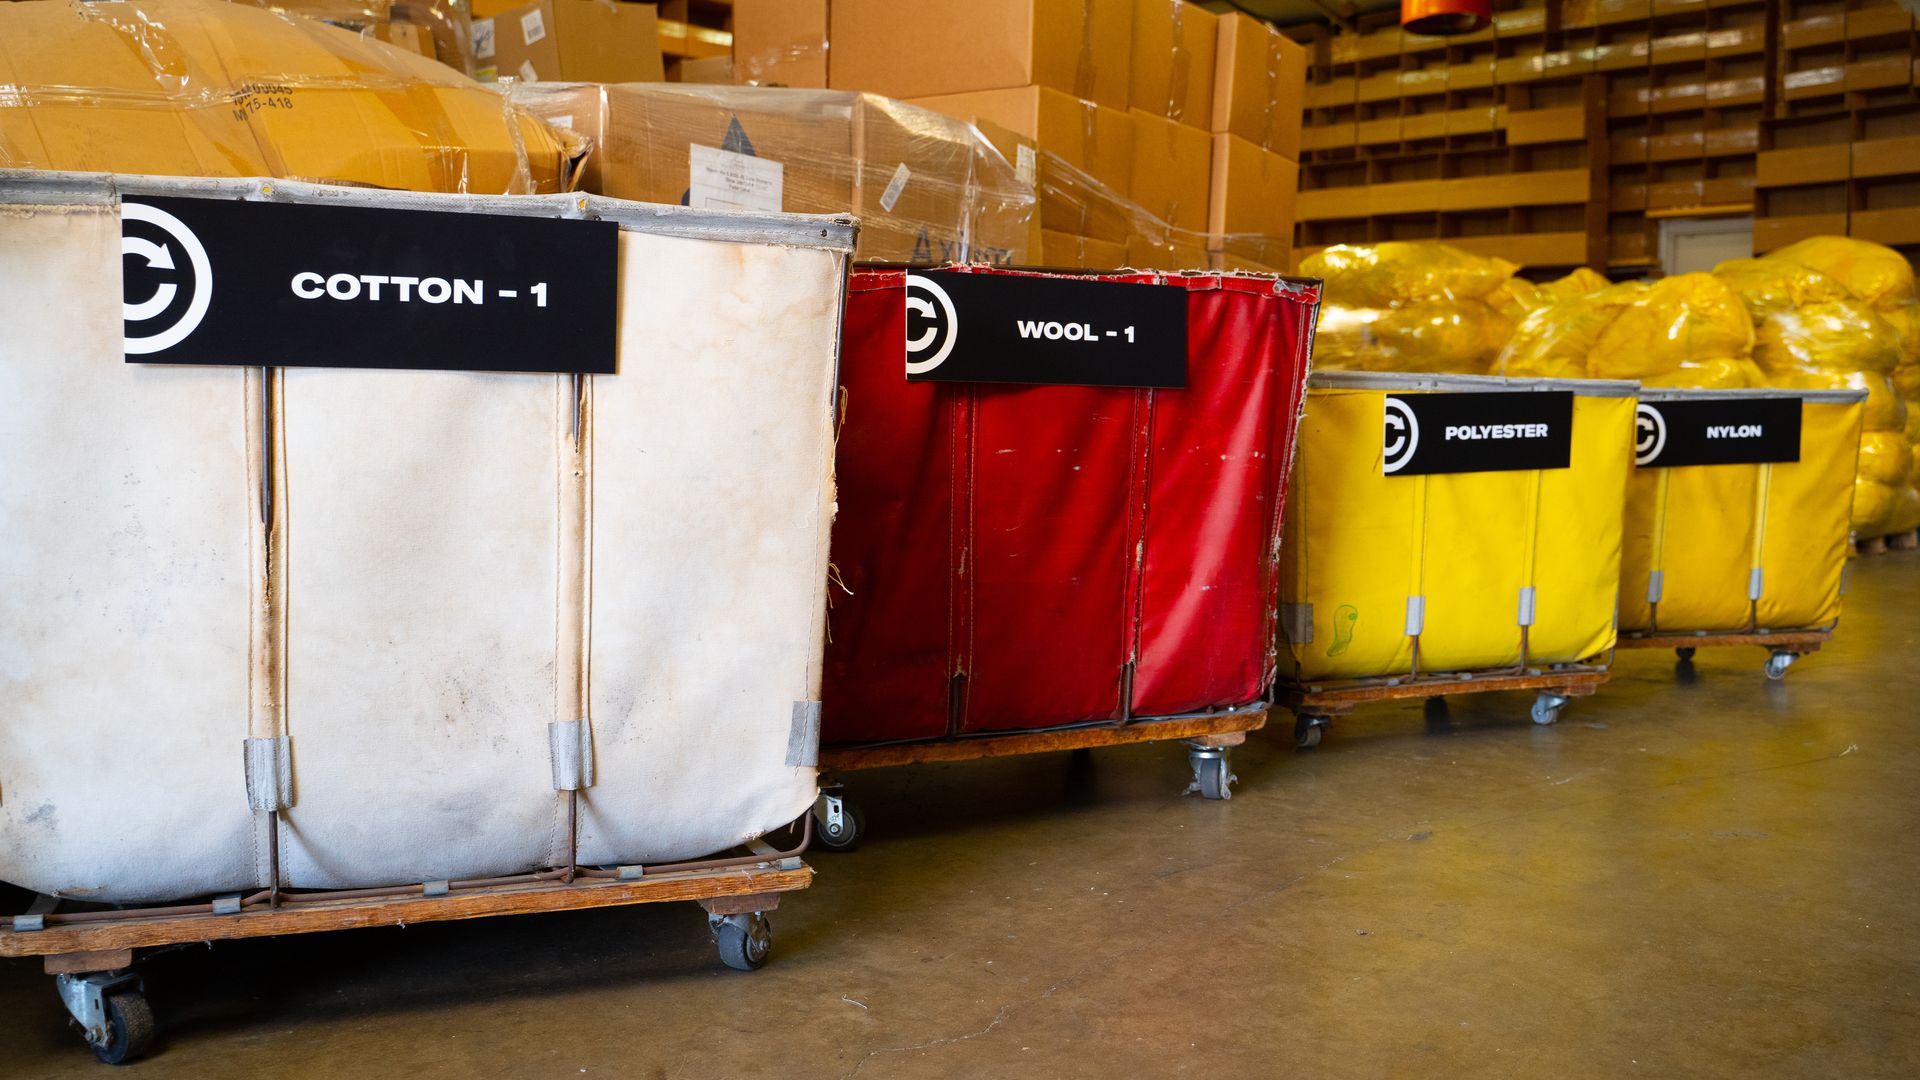 Colored bins, which sit in a warehouse, are used to sort textiles that will be recycled.